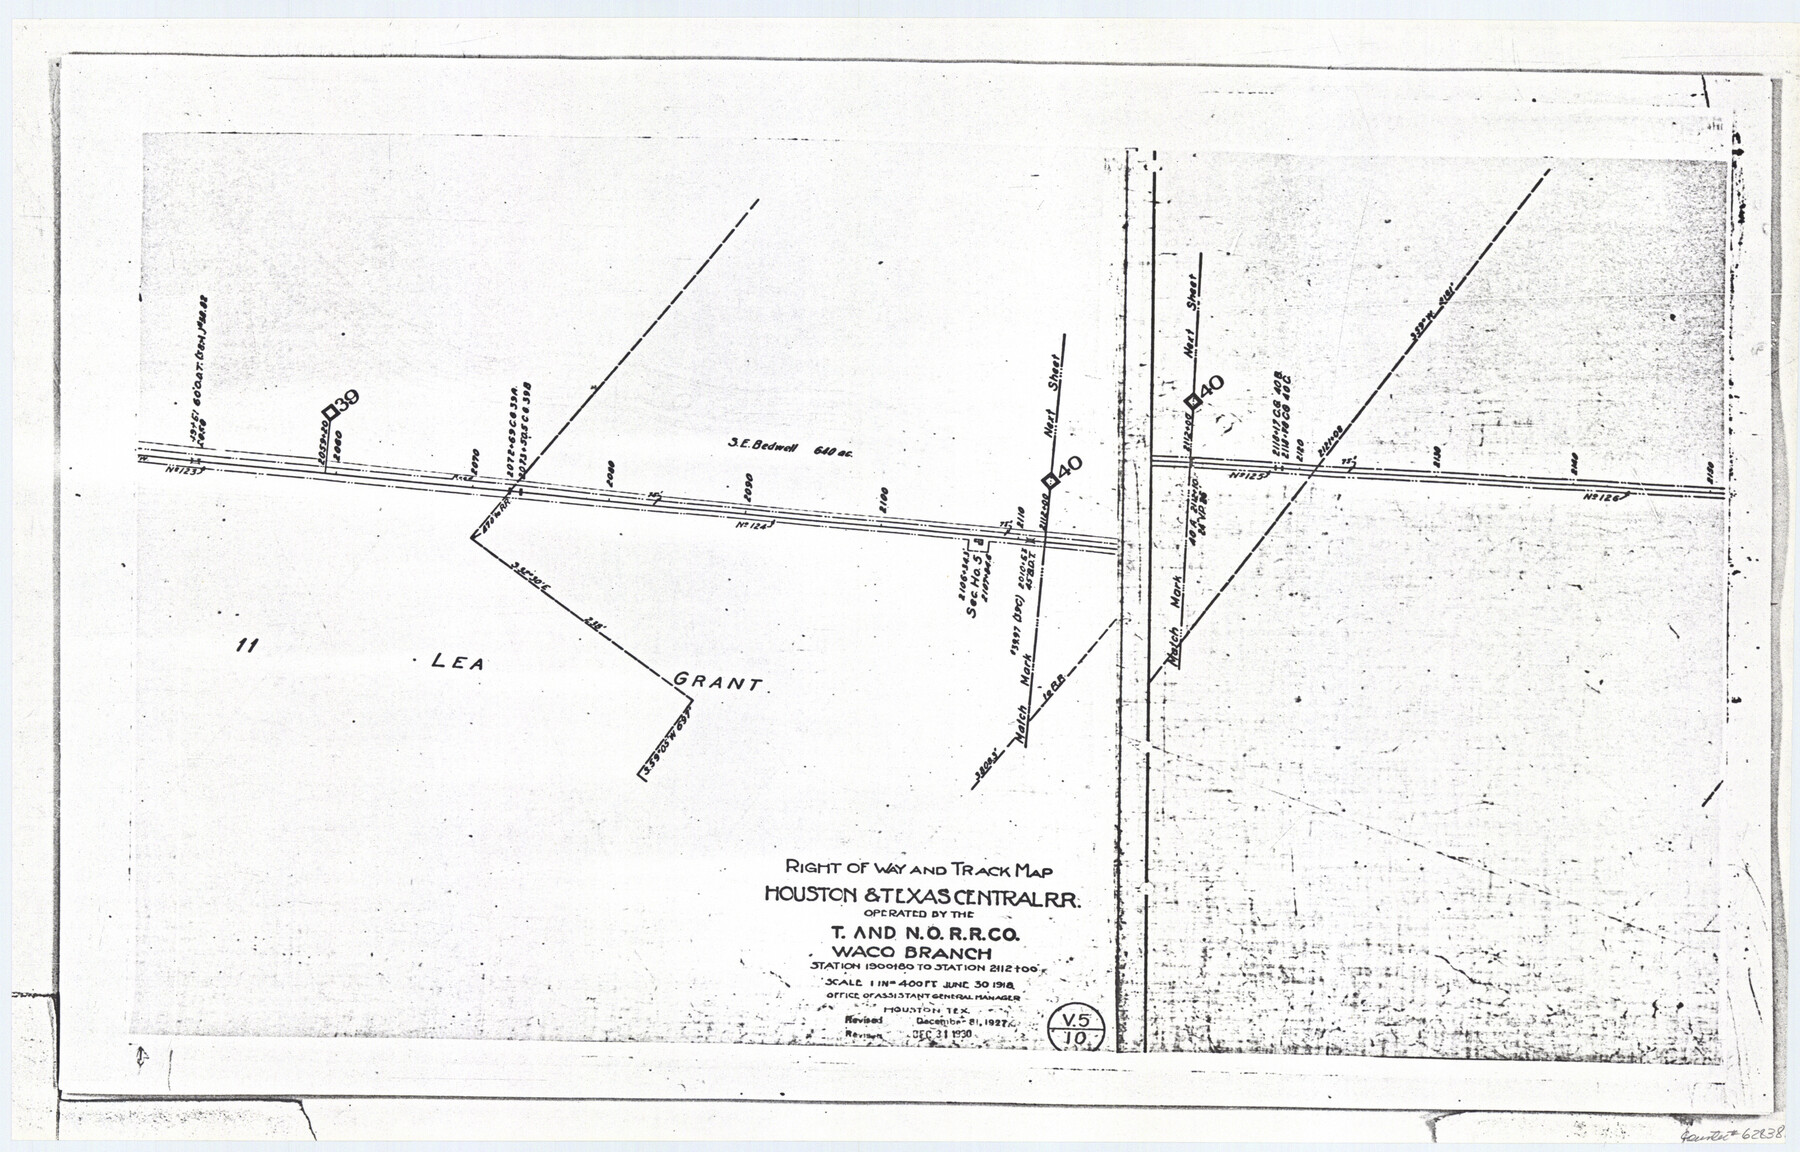 62838, Railroad Track Map, H&TCRRCo., Falls County, Texas, General Map Collection